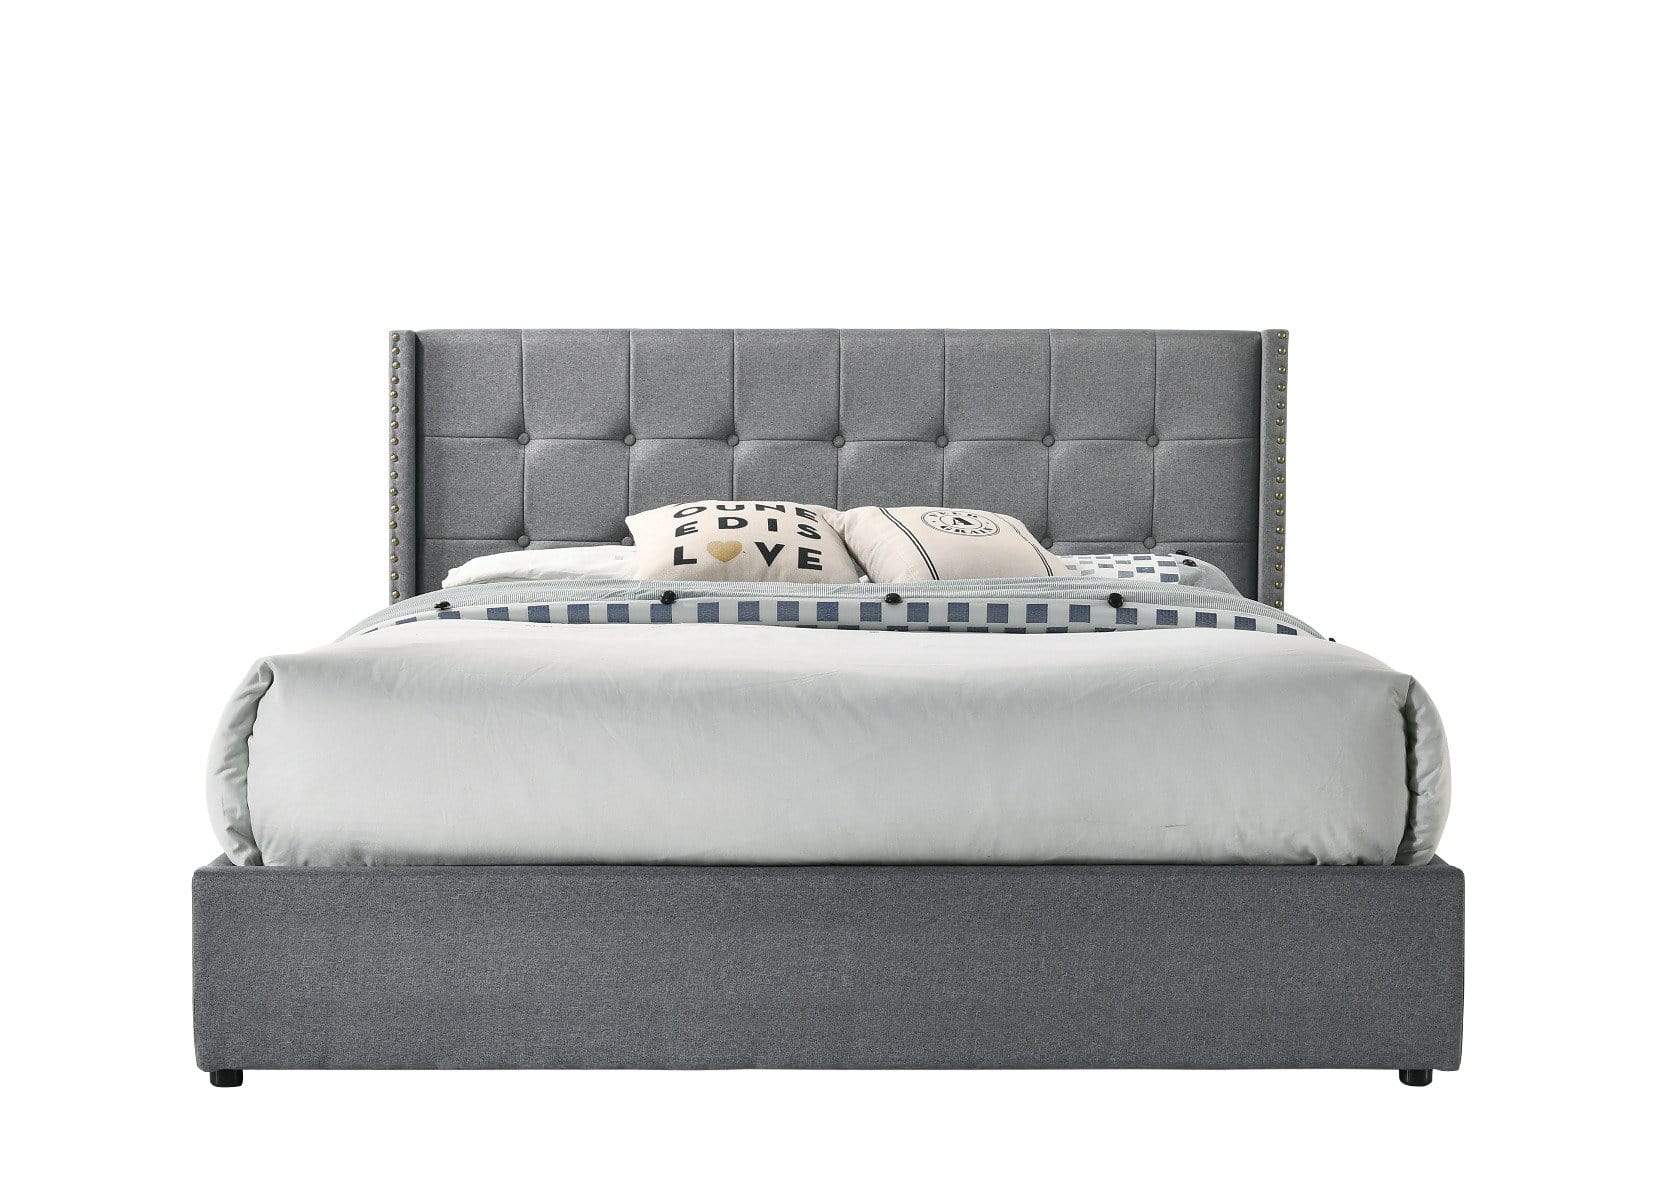 Queen Sized Winged Fabric Bed Frame with Gas Lift Storage in Light Grey - Newstart Furniture